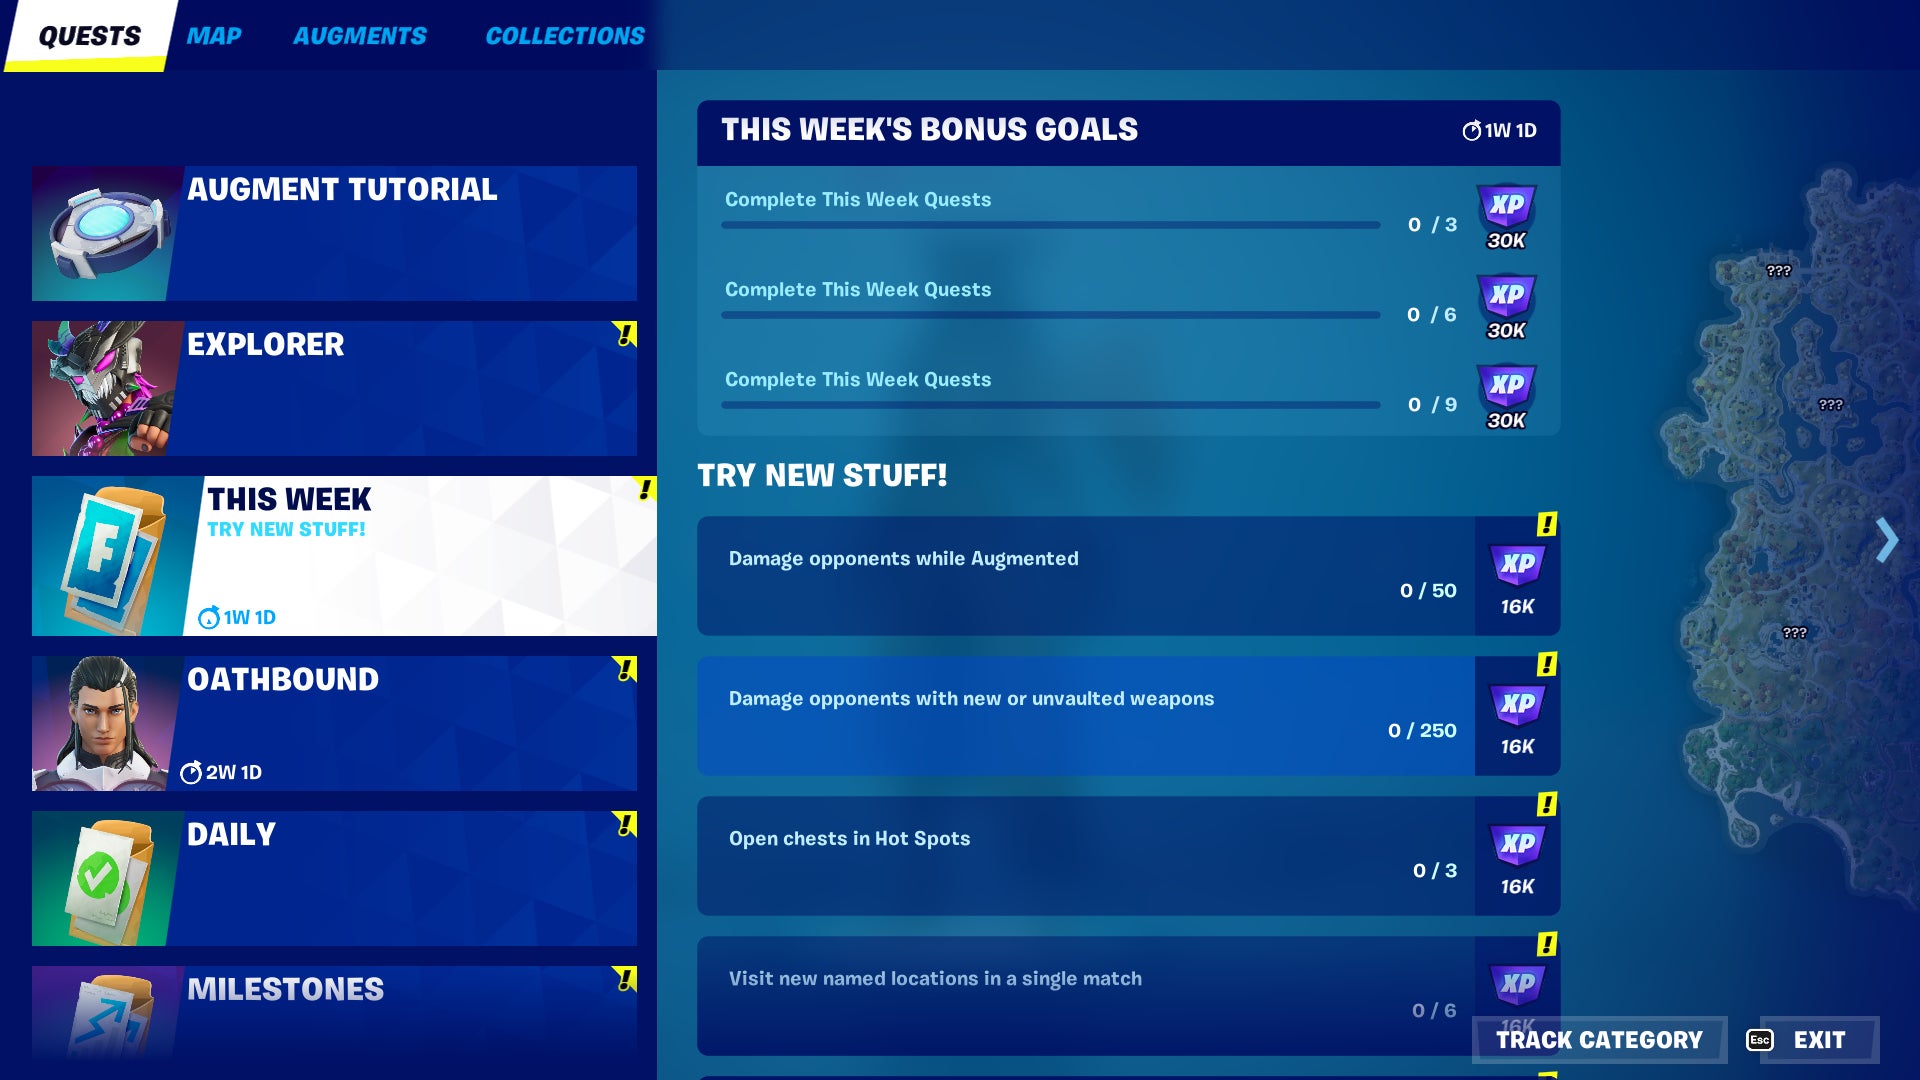 The weekly quests page in Fortnite